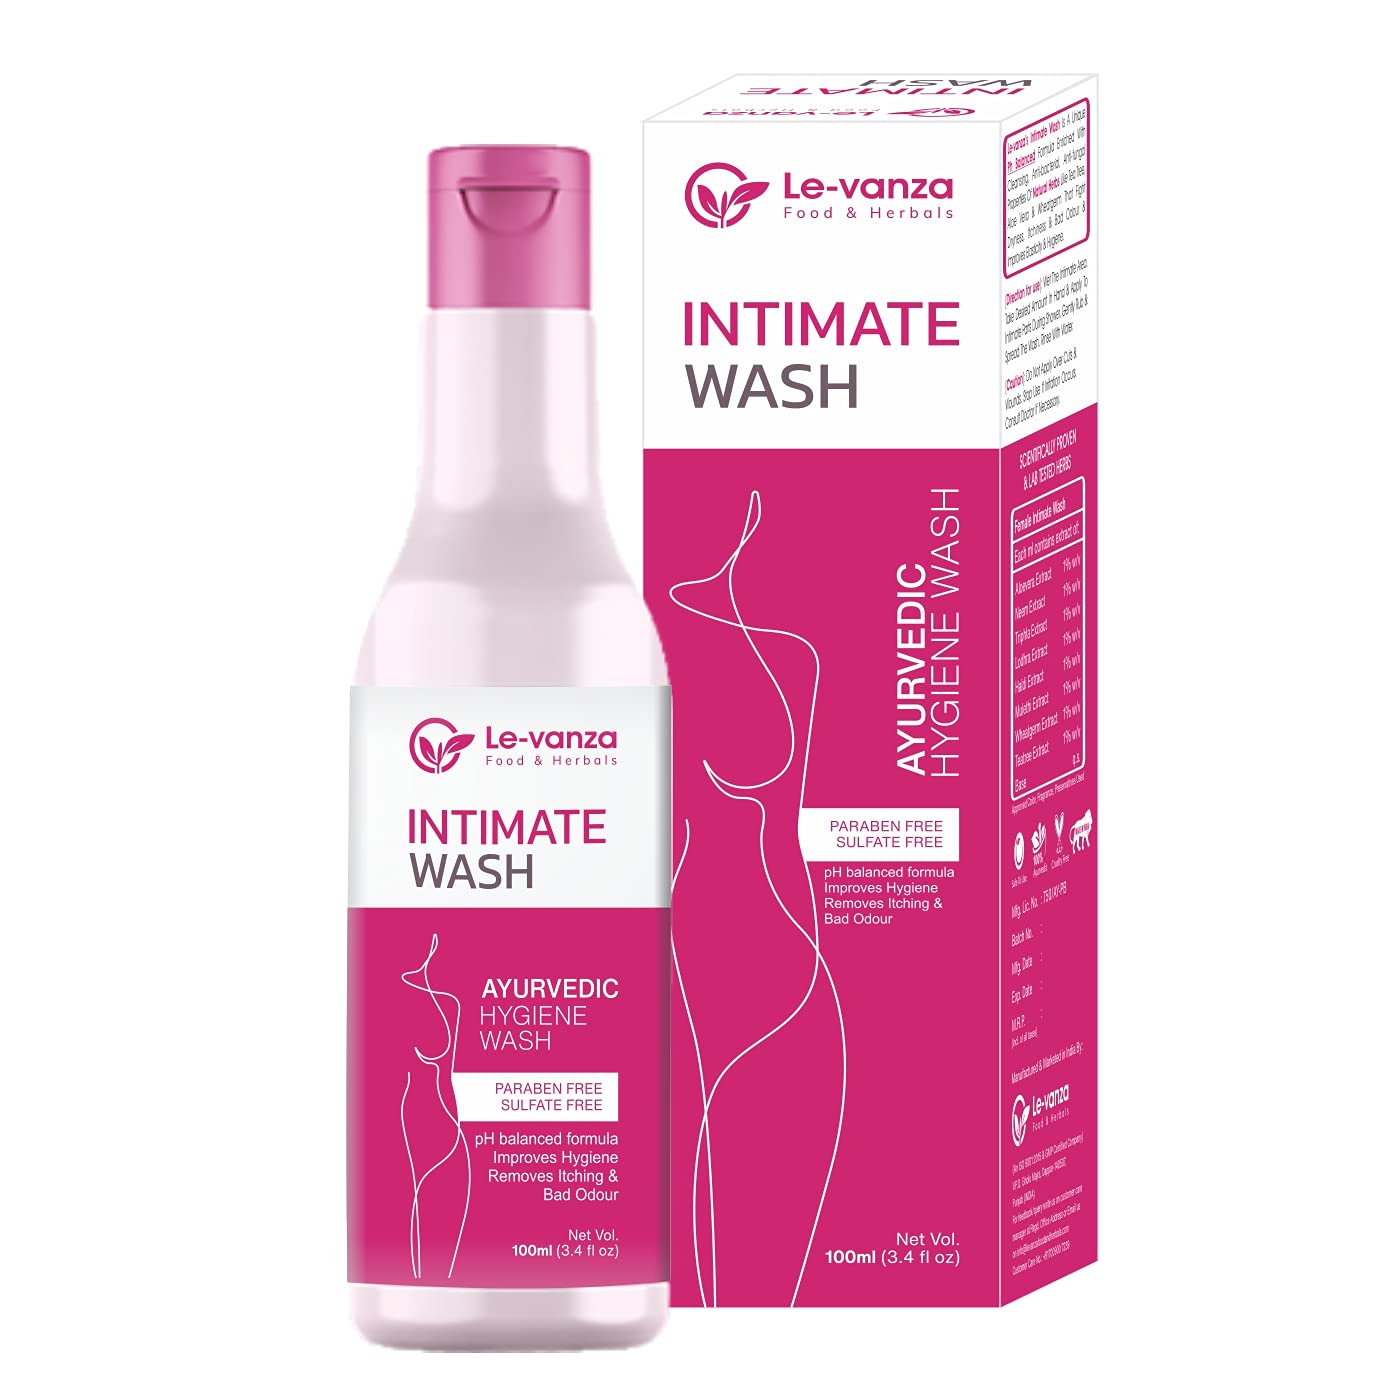 Ayurvedic 100ml (Pack of 1) Intimate Hygiene Hygiene Wash for Women Vaginal Wash Prevents Itching Irritation & Dryness, Suitable For All Skin Types